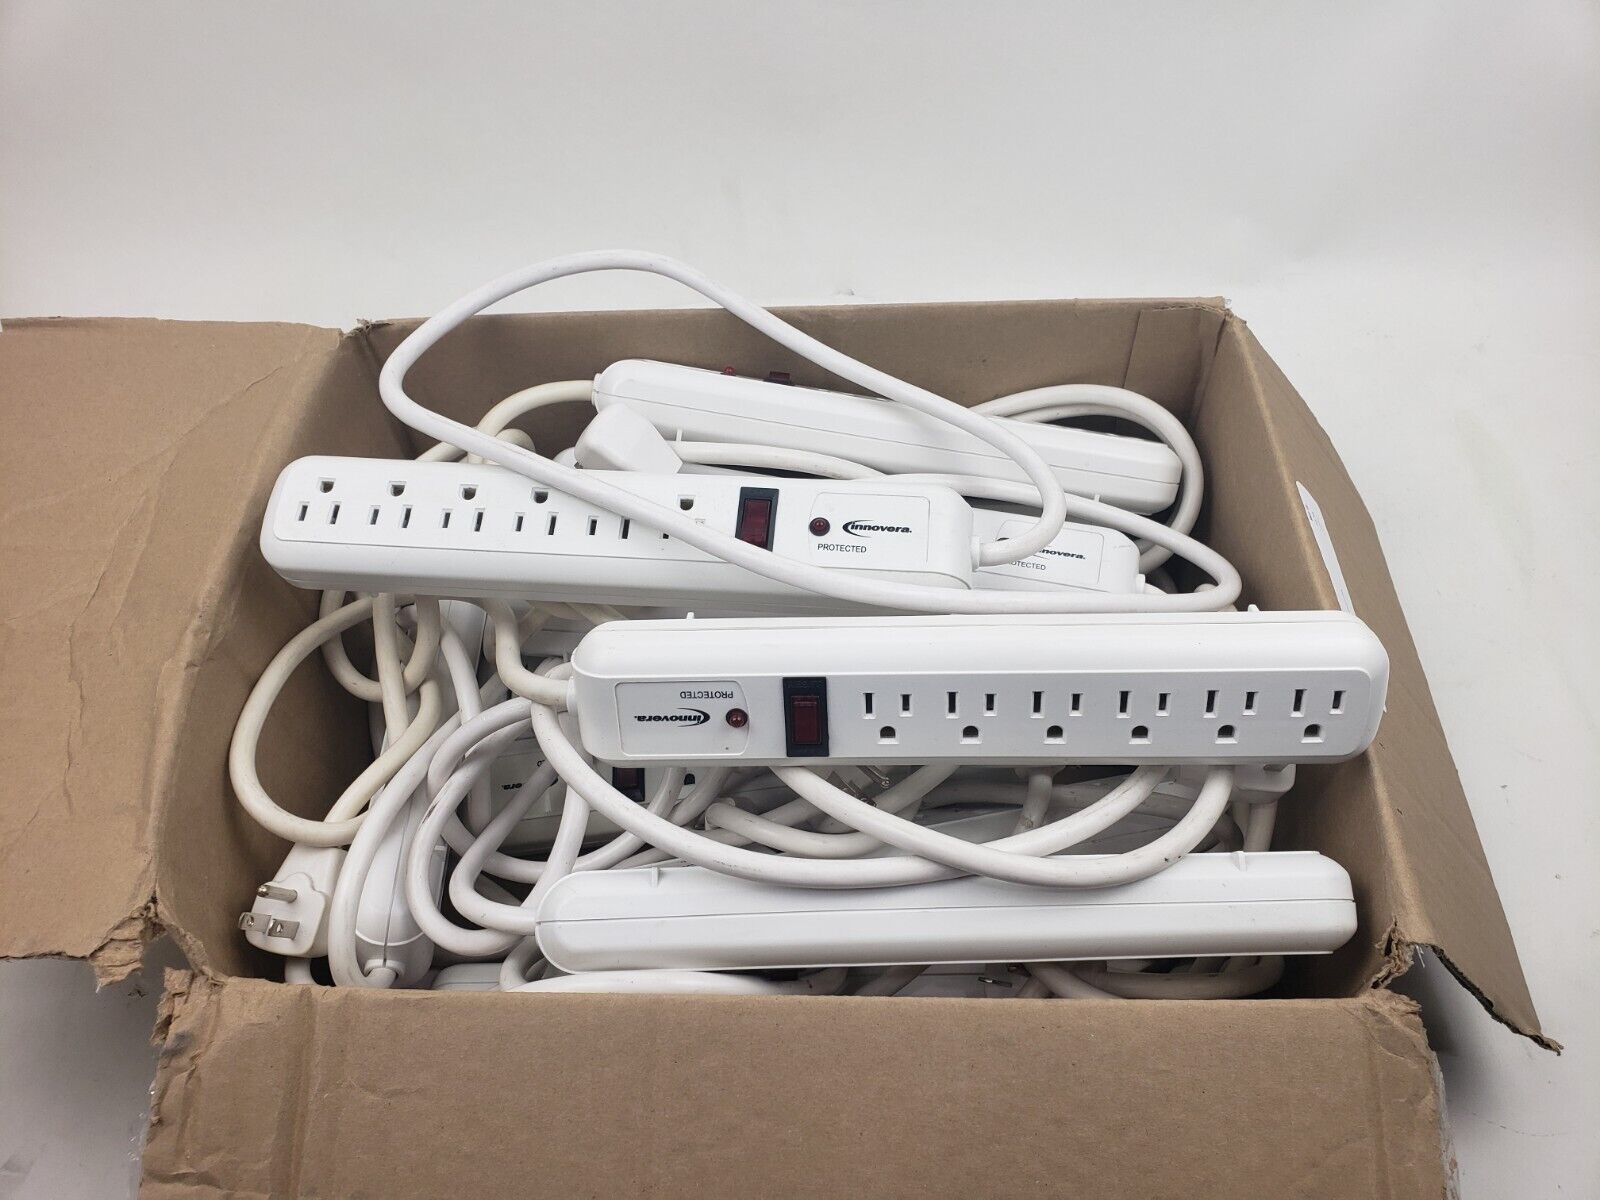 Lot of 13 Innovera 71653 6 AC Outlets 4' Cord 540 J Surge Protector - White